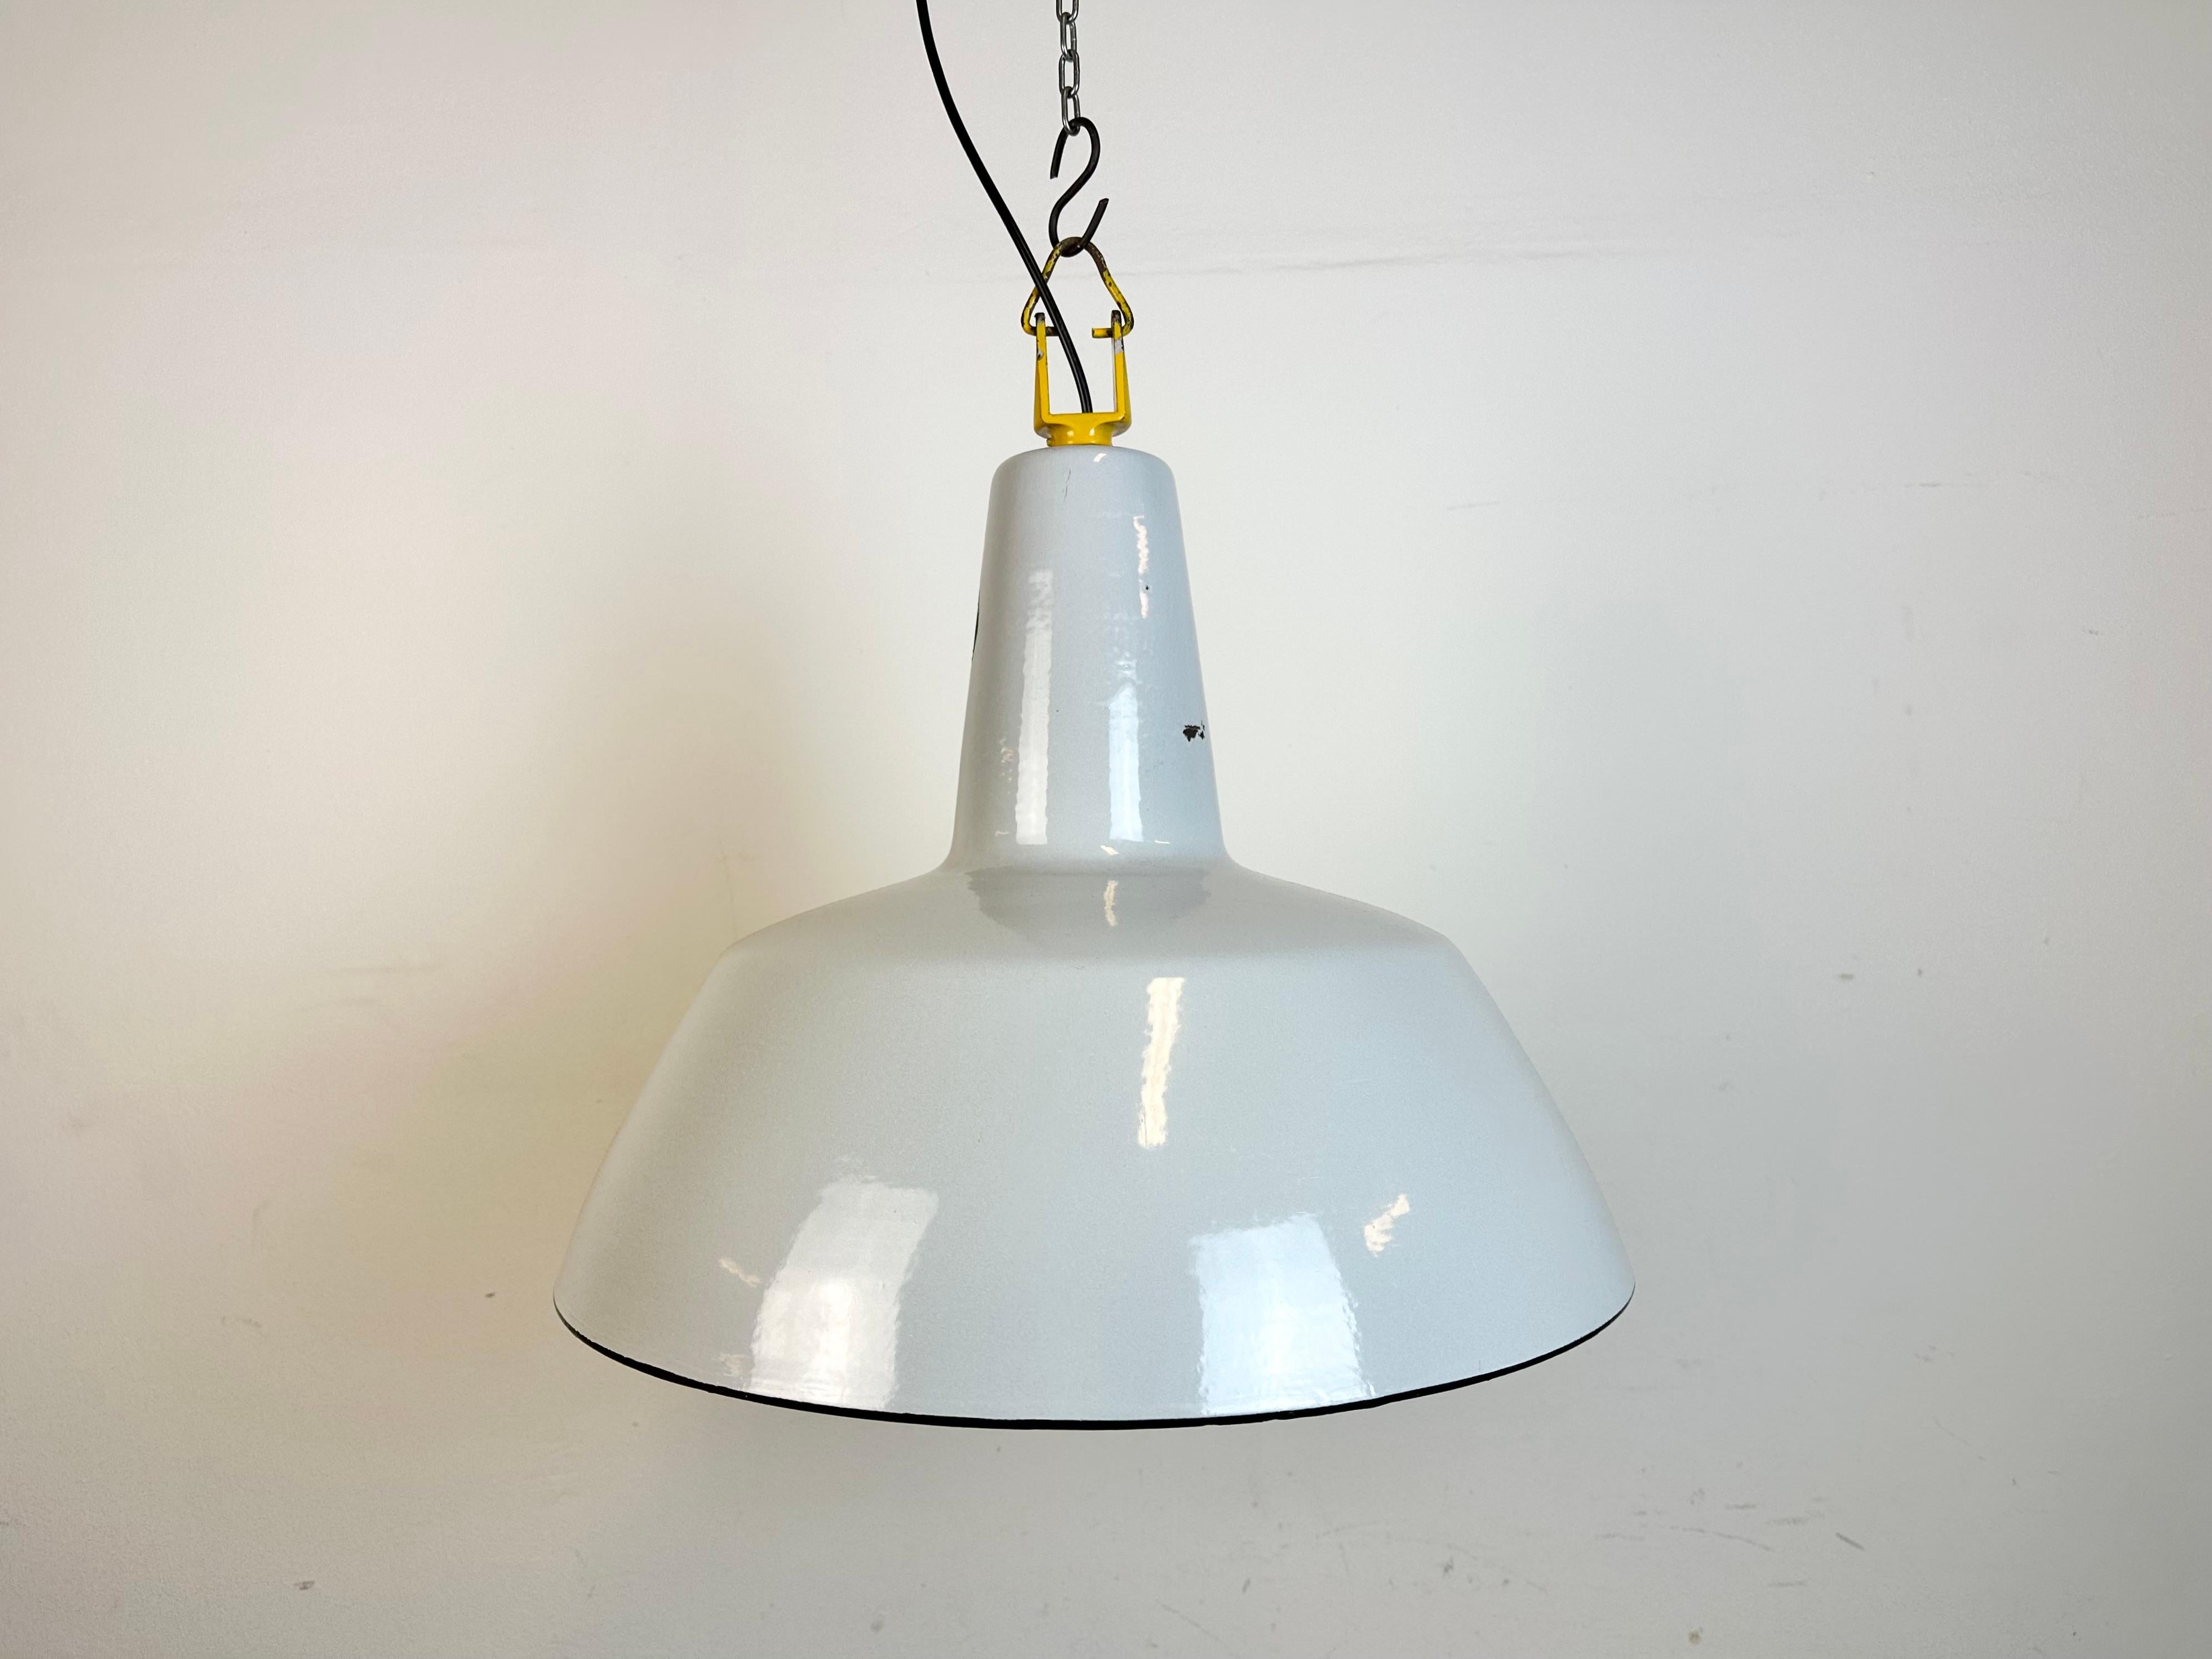 Industrial light grey enamel factory pendant light made by Philips in Netherlands during the 1960s. White enamel inside the shade. Iron top. Porcelain socket requires standard E 27/ E26 light bulbs. New wire. Fully functional. The weight of the lamp